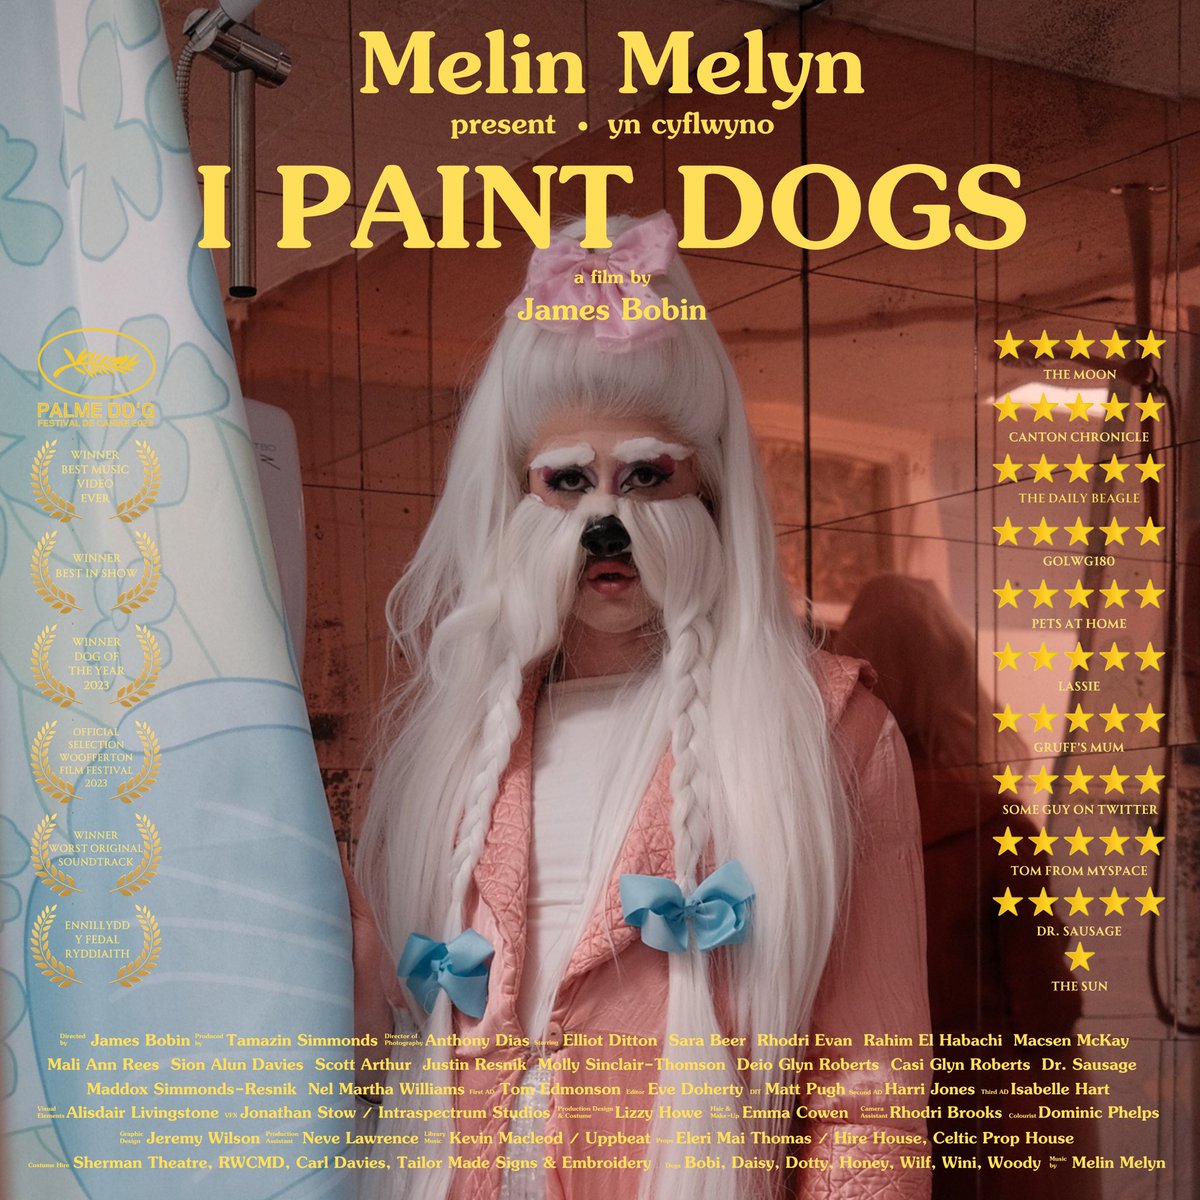 MUSIC VIDEO PREMIERE 🎬🍿 we’re having a red carpet premiere of our brand new I PAINT DOGS music video in a secret location in Cardiff on Dec 5th + Q&A with director James Bobin (Ali G, Borat, The Muppets + more) join our Mailing List for Tickets eepurl.com/hTRj8b MM 💛